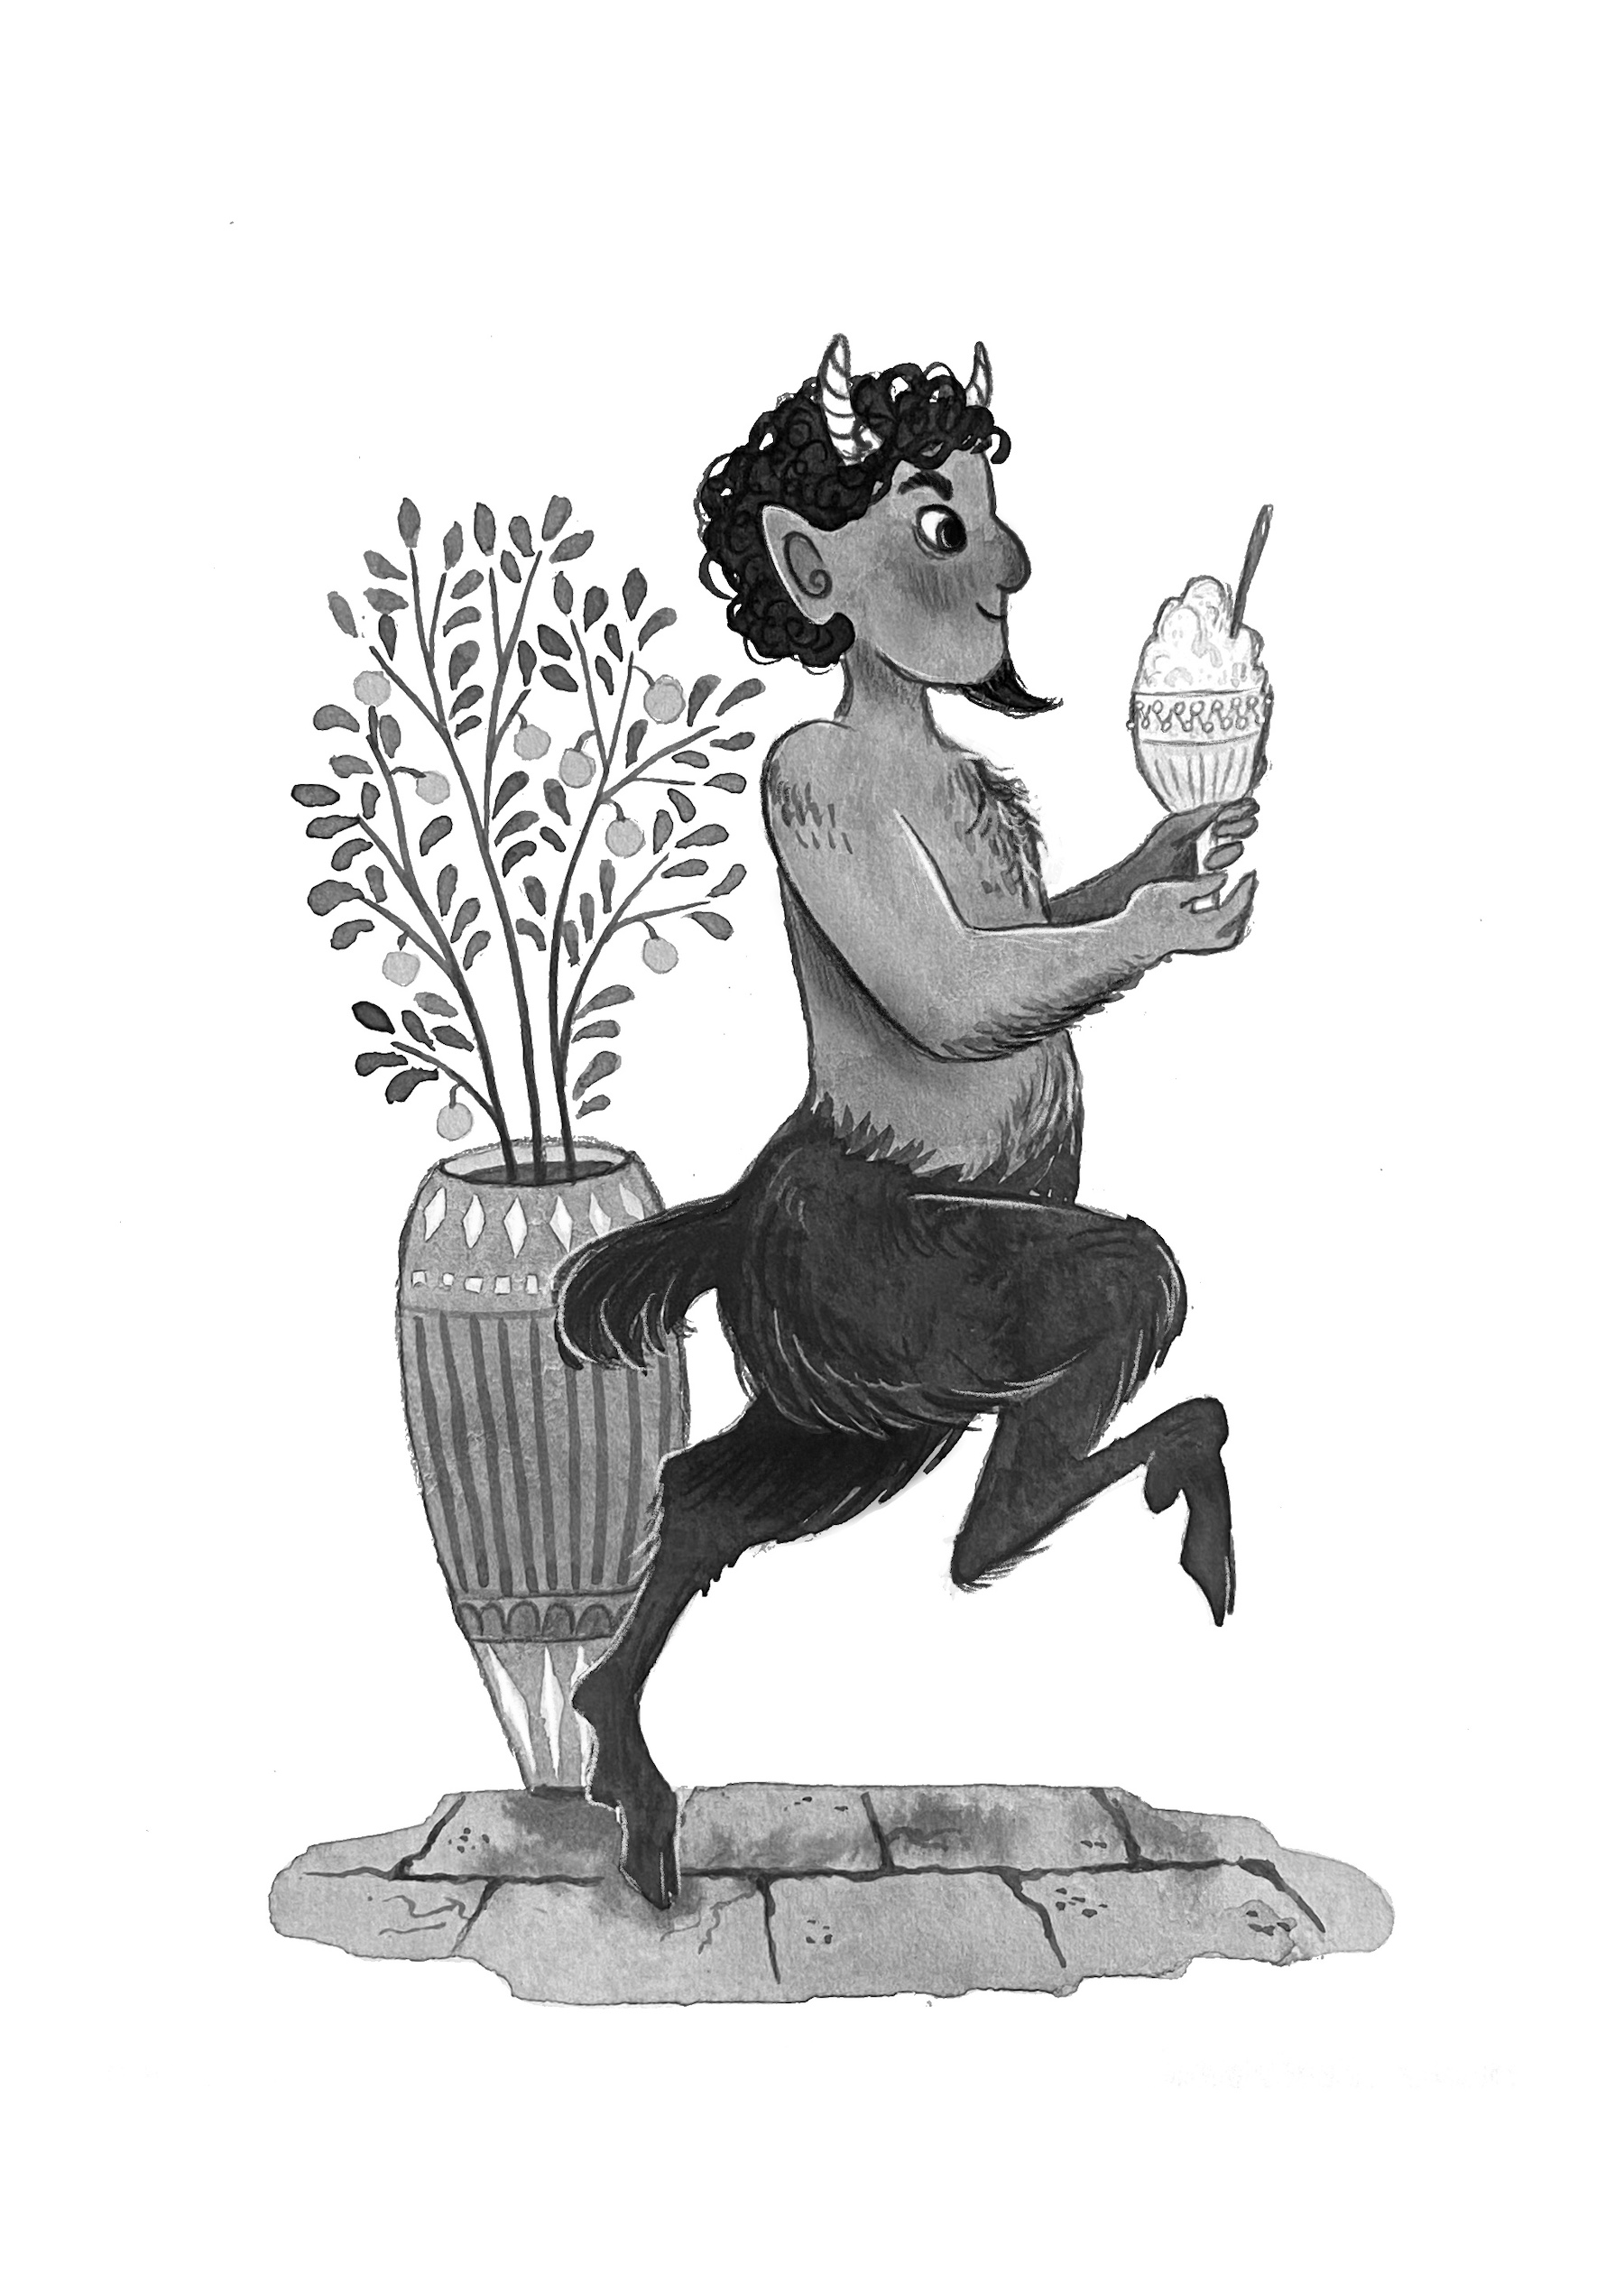 Black and white spot illustration of Mr Tumnus from the Chronicles of Narnia, showing Mr Tumnus trotting across a stone floor, carrying a dish of ice cream. In the background is a small potted tree.